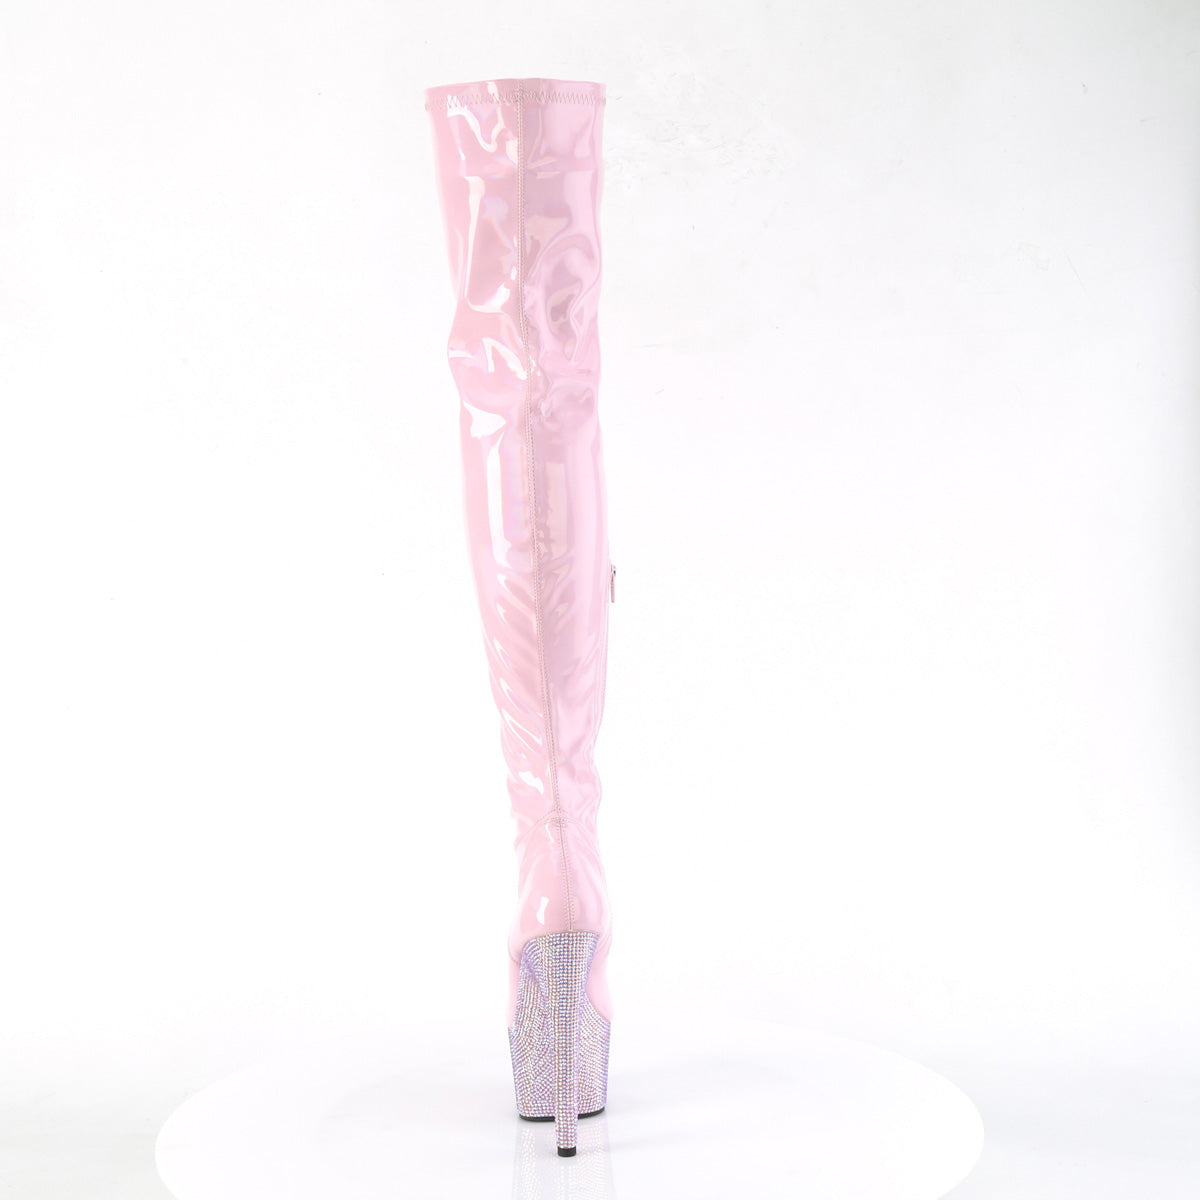 PLEASER BEJEWELED-3000-7 BABY PINK HOLOGRAM RHINESTONE 7 INCH THIGH HIGH BOOTS SIZE 8 SALE